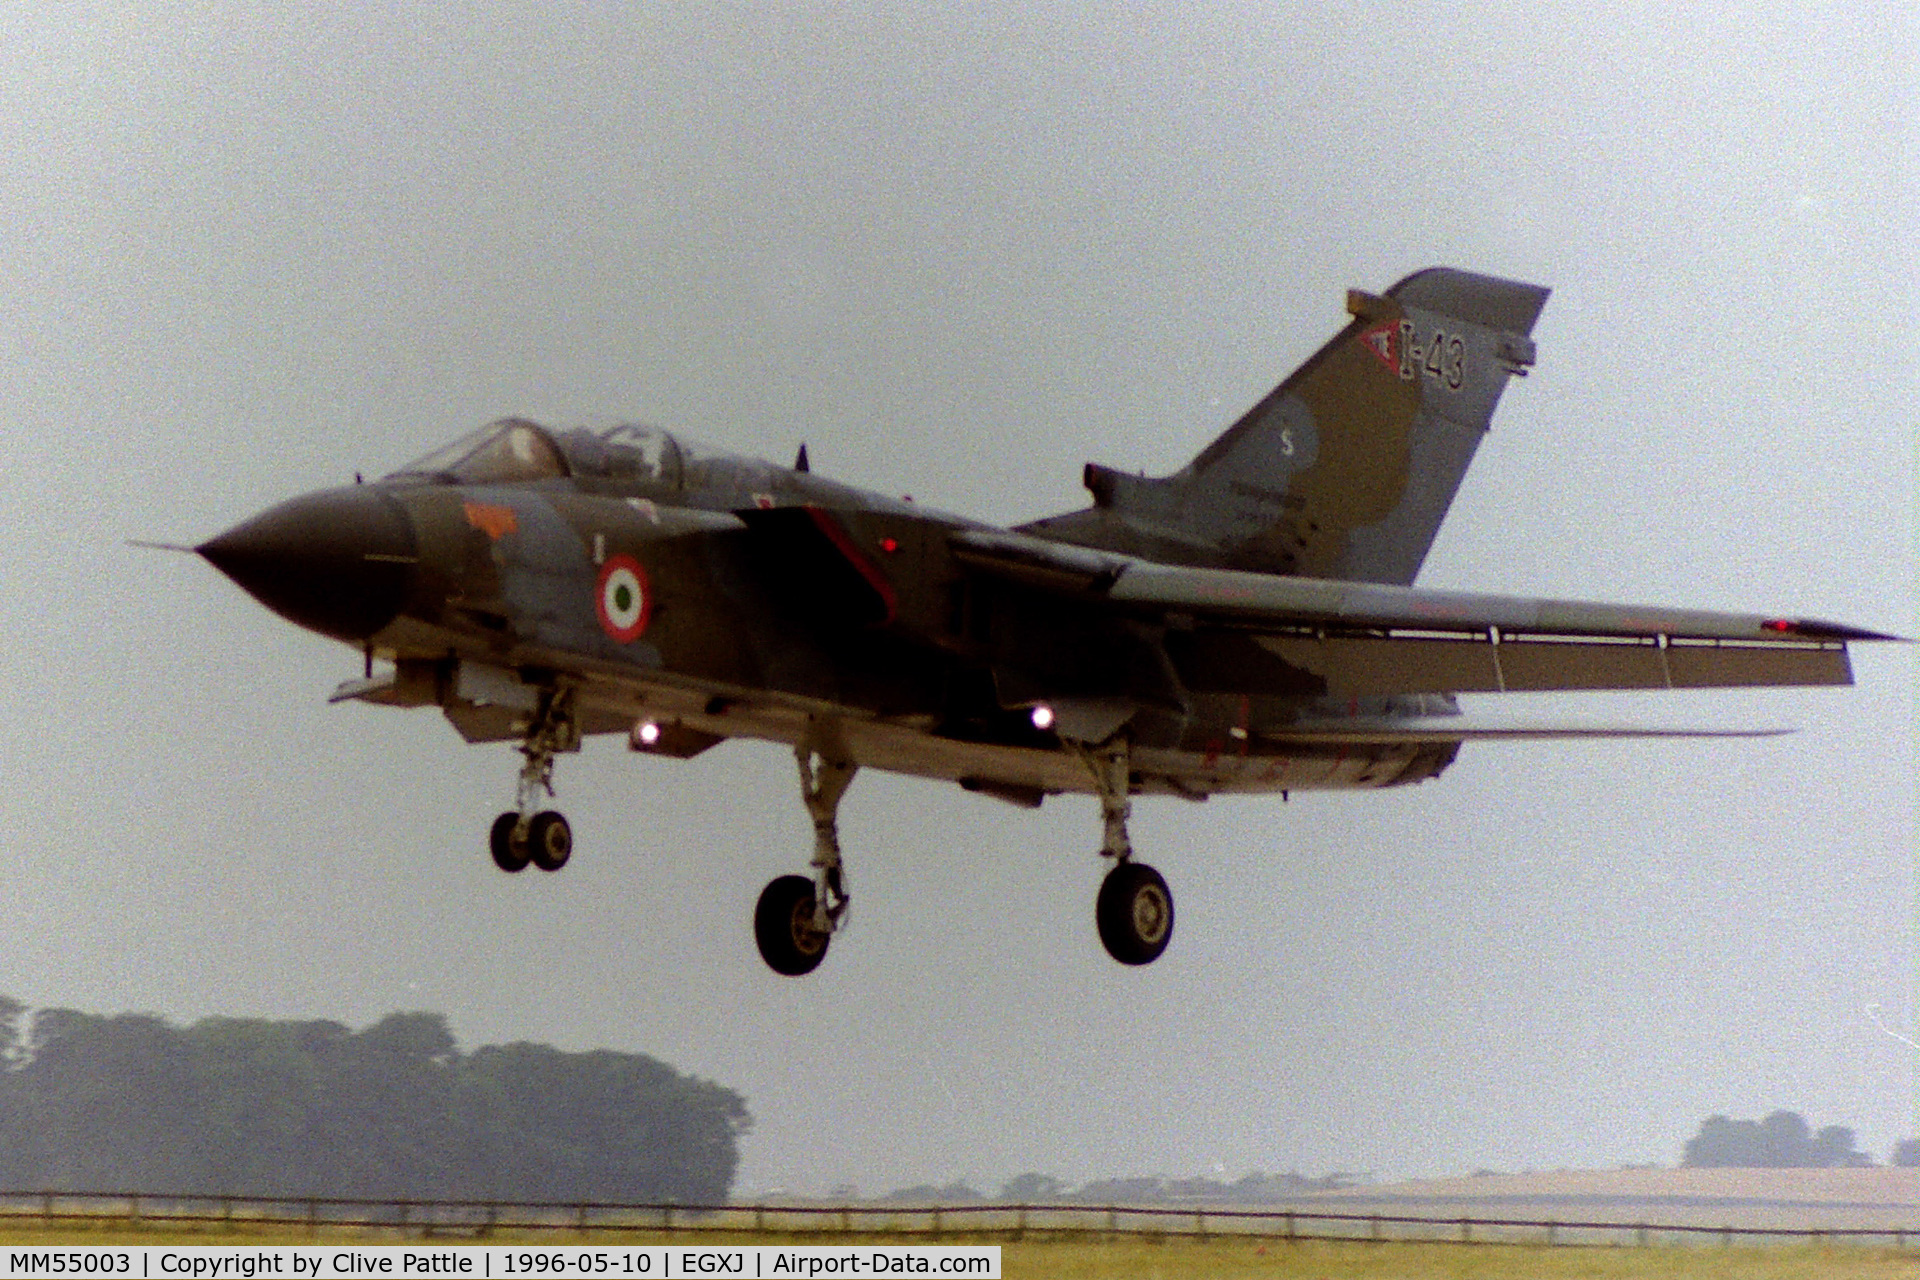 MM55003, Panavia Tornado IDS(T) C/N 108/IST004/5009, Landing at RAF Cottesmore in May 1996 whilst coded I-43 with the based TTTE